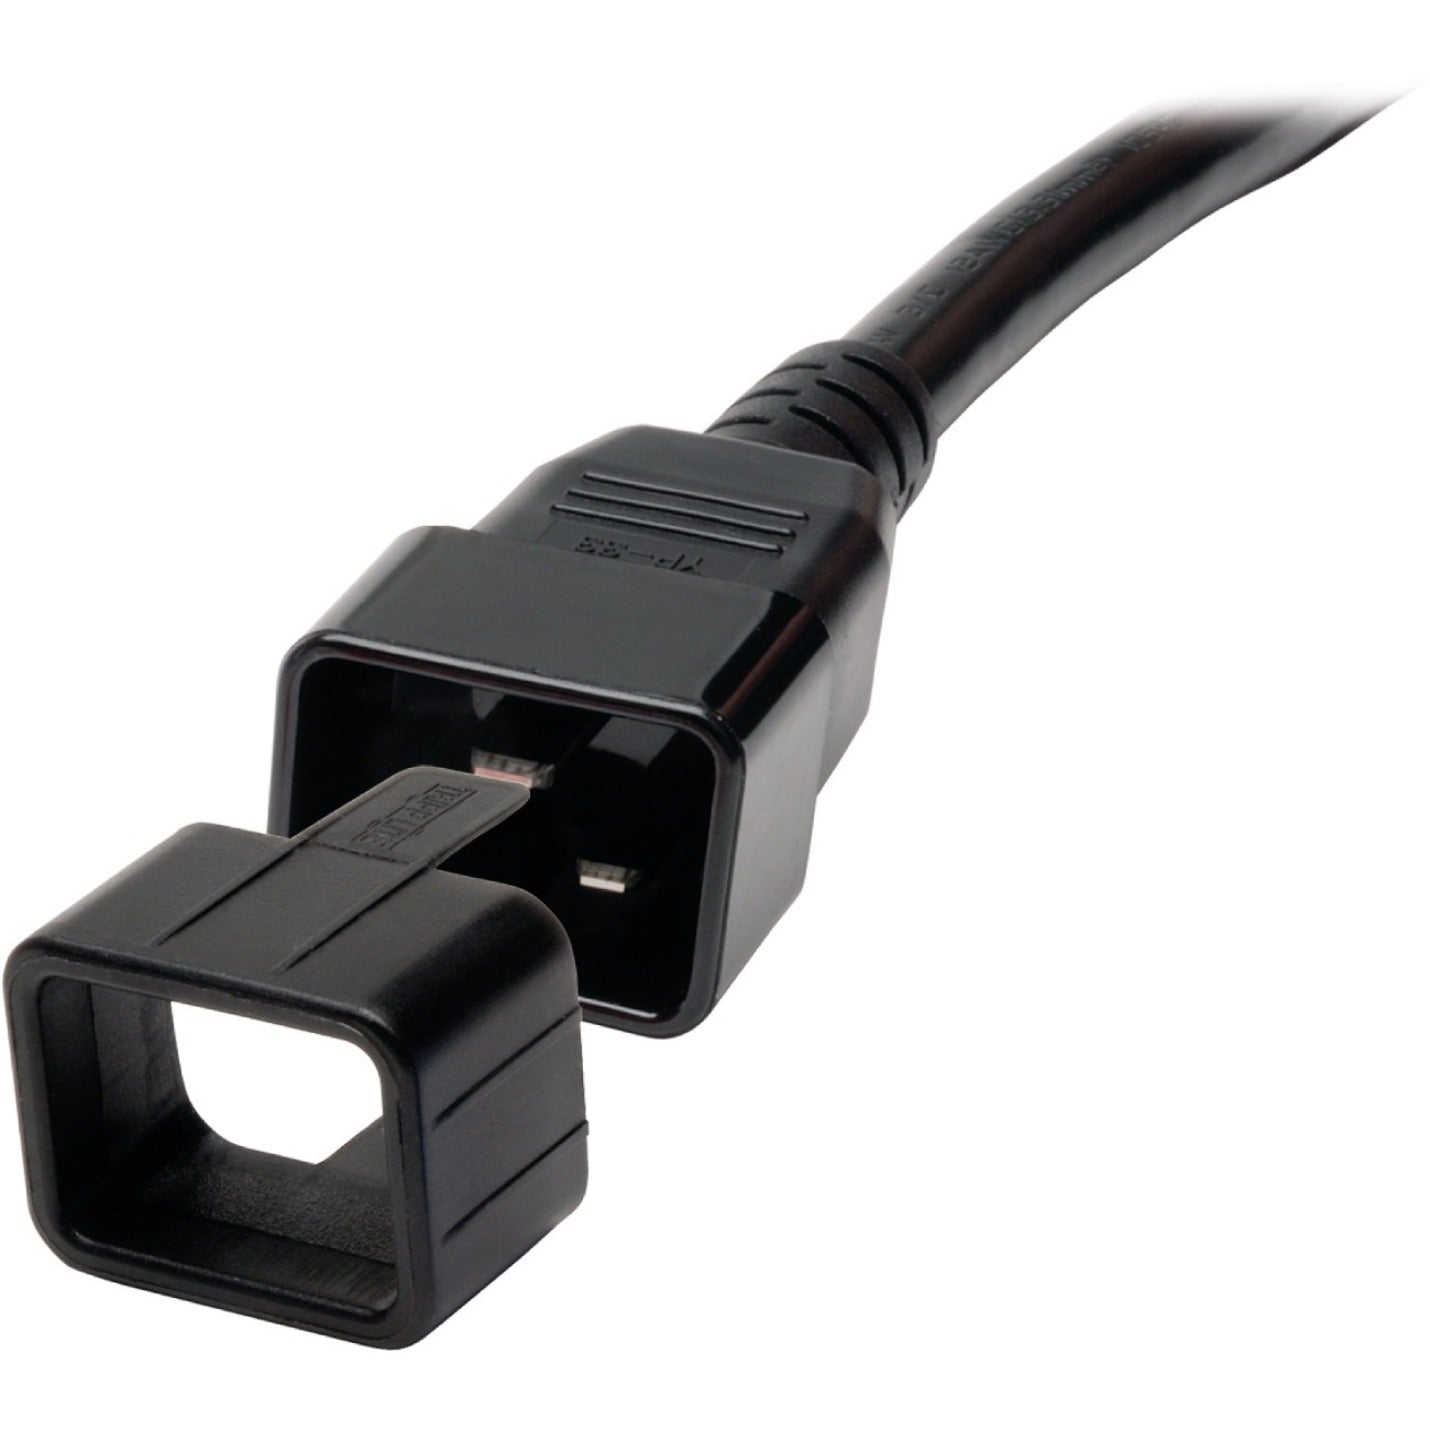 Tripp Lite by Eaton Plug-lock Inserts keep C20 power cords solidly connected to C19 outlets, BLACK color, Package of 100 (PLC19BK)